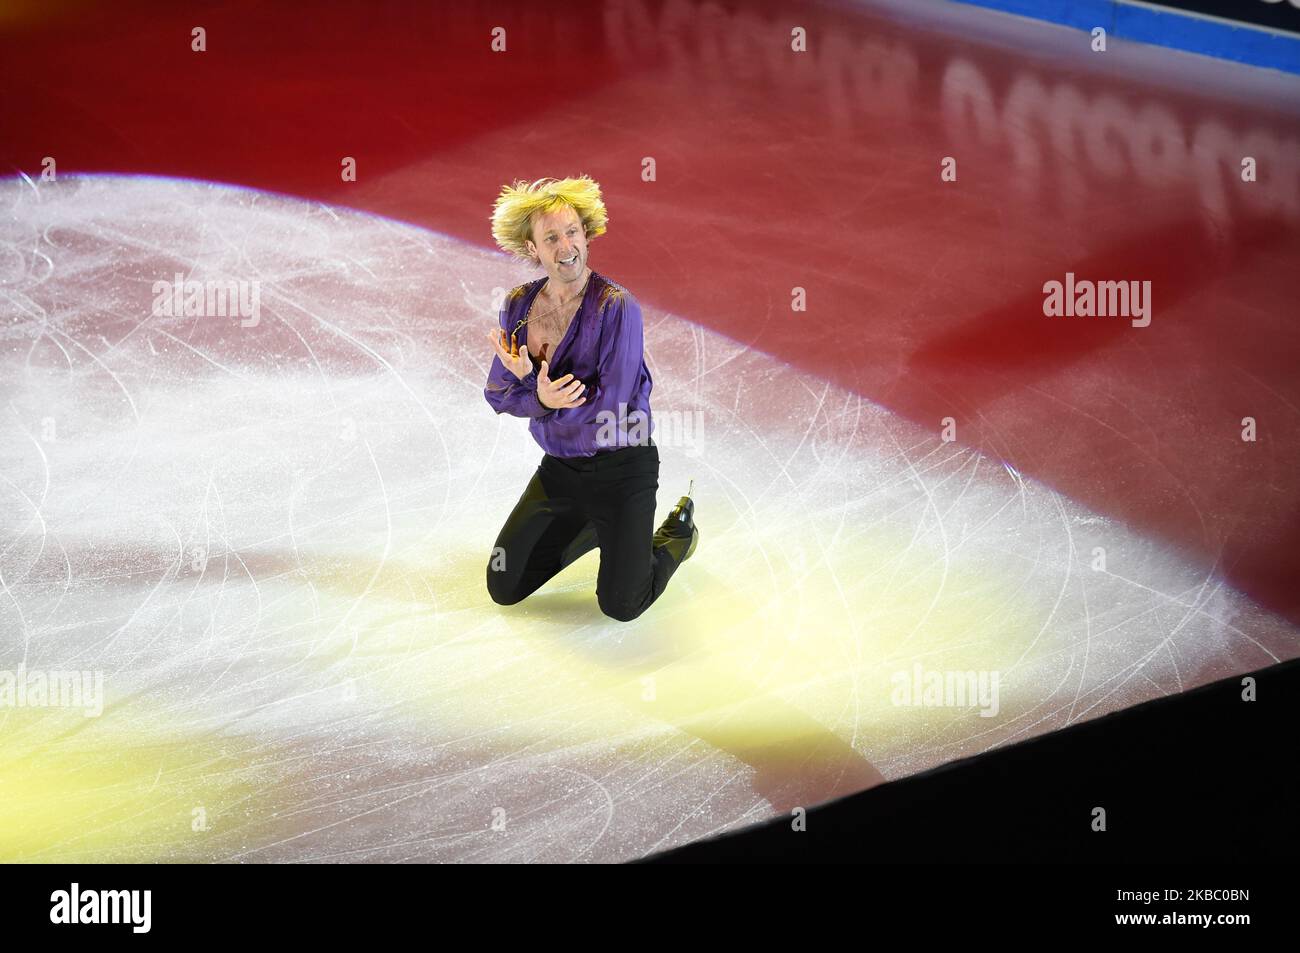 Russian skater Evgini Plushenko skating during the Golden Skate Gala, an annual event that brings together the best skaters in the world in an evening of absolute show that this year was held on November 30, 2019 at the Allianz Cloud in Milan, Italy. (Photo by Andrea Diodato/NurPhoto) Stock Photo